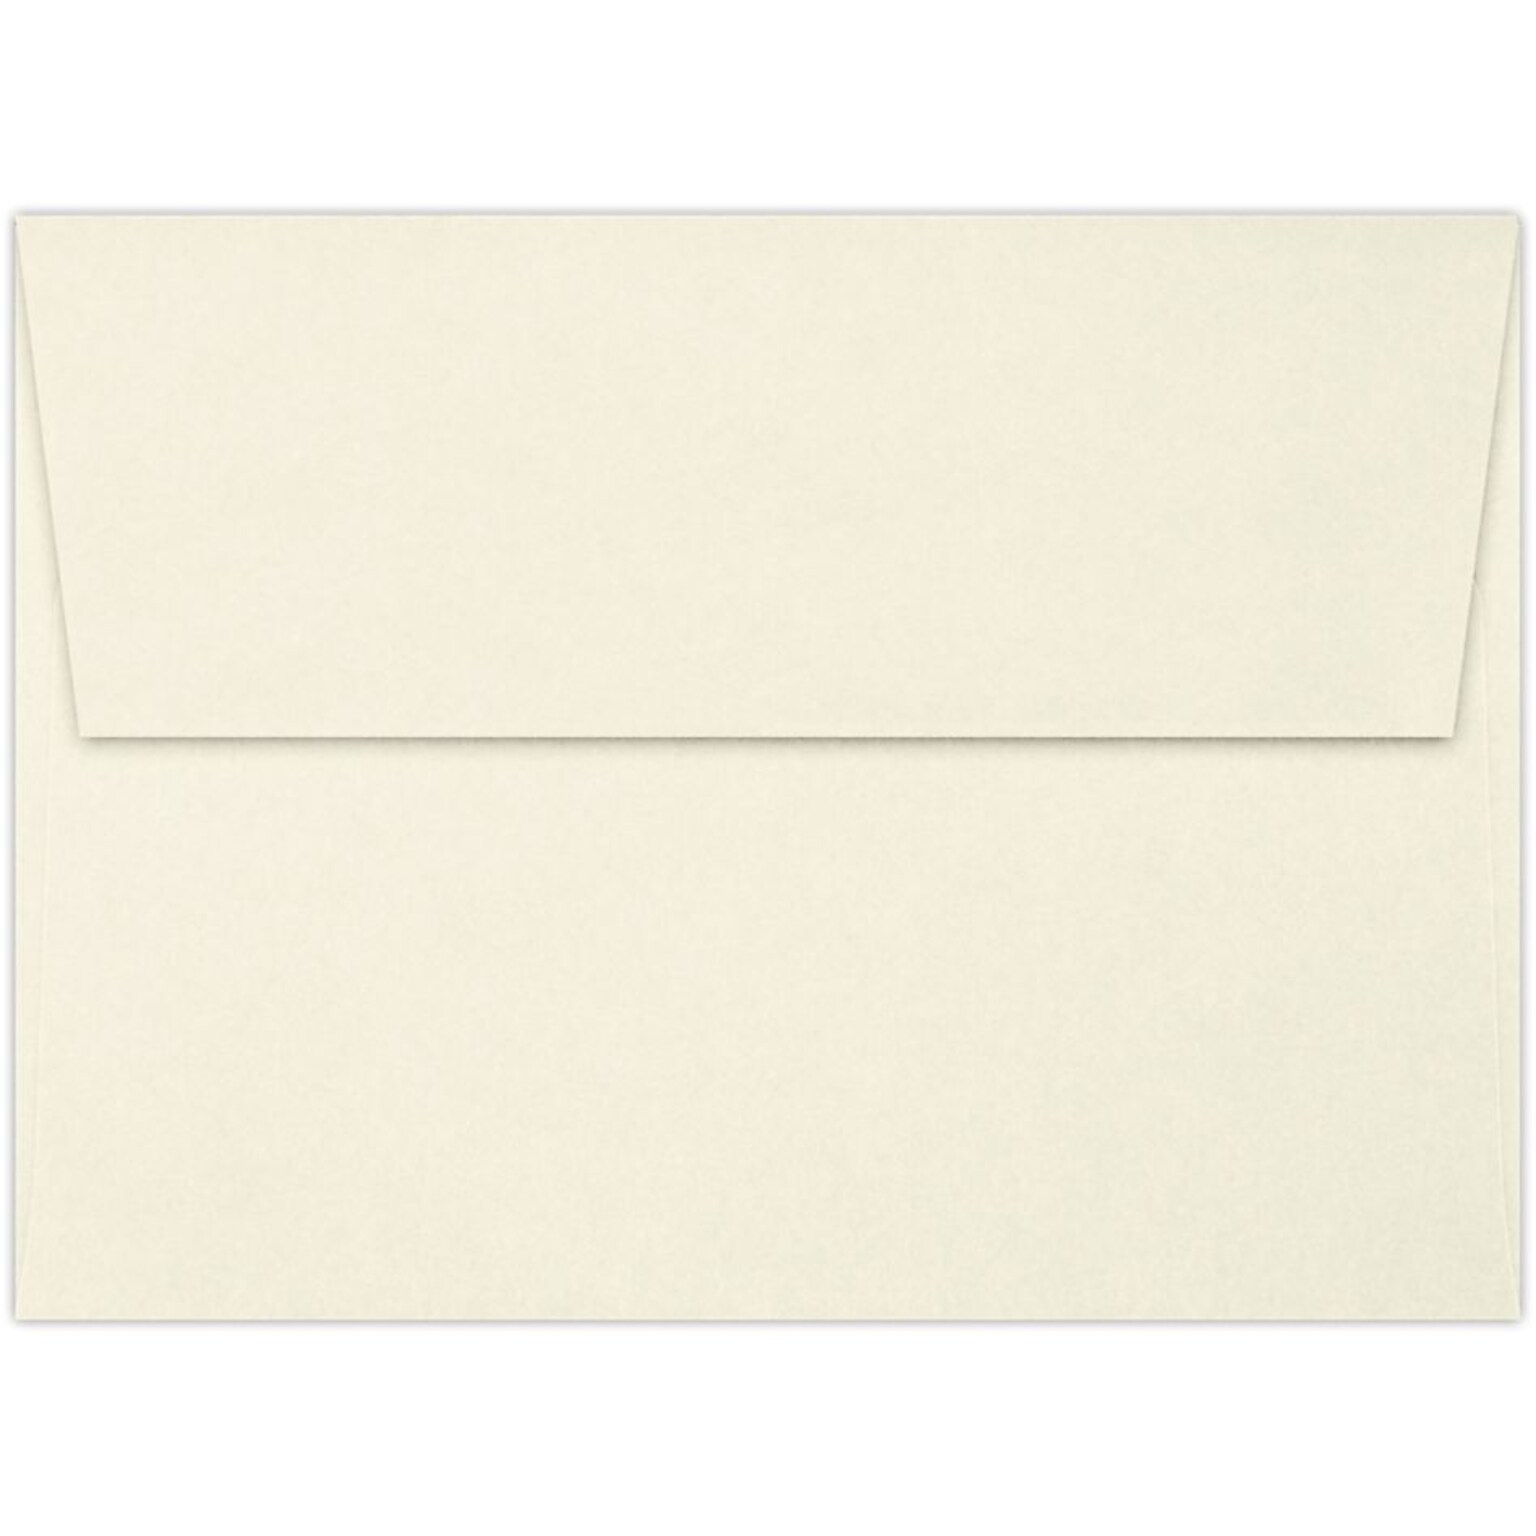 LUX A6 Invitation Envelopes (4 3/4 x 6 1/2) 250/Pack, Classic Linen® Baronial Ivory (4875-70BILI-250)